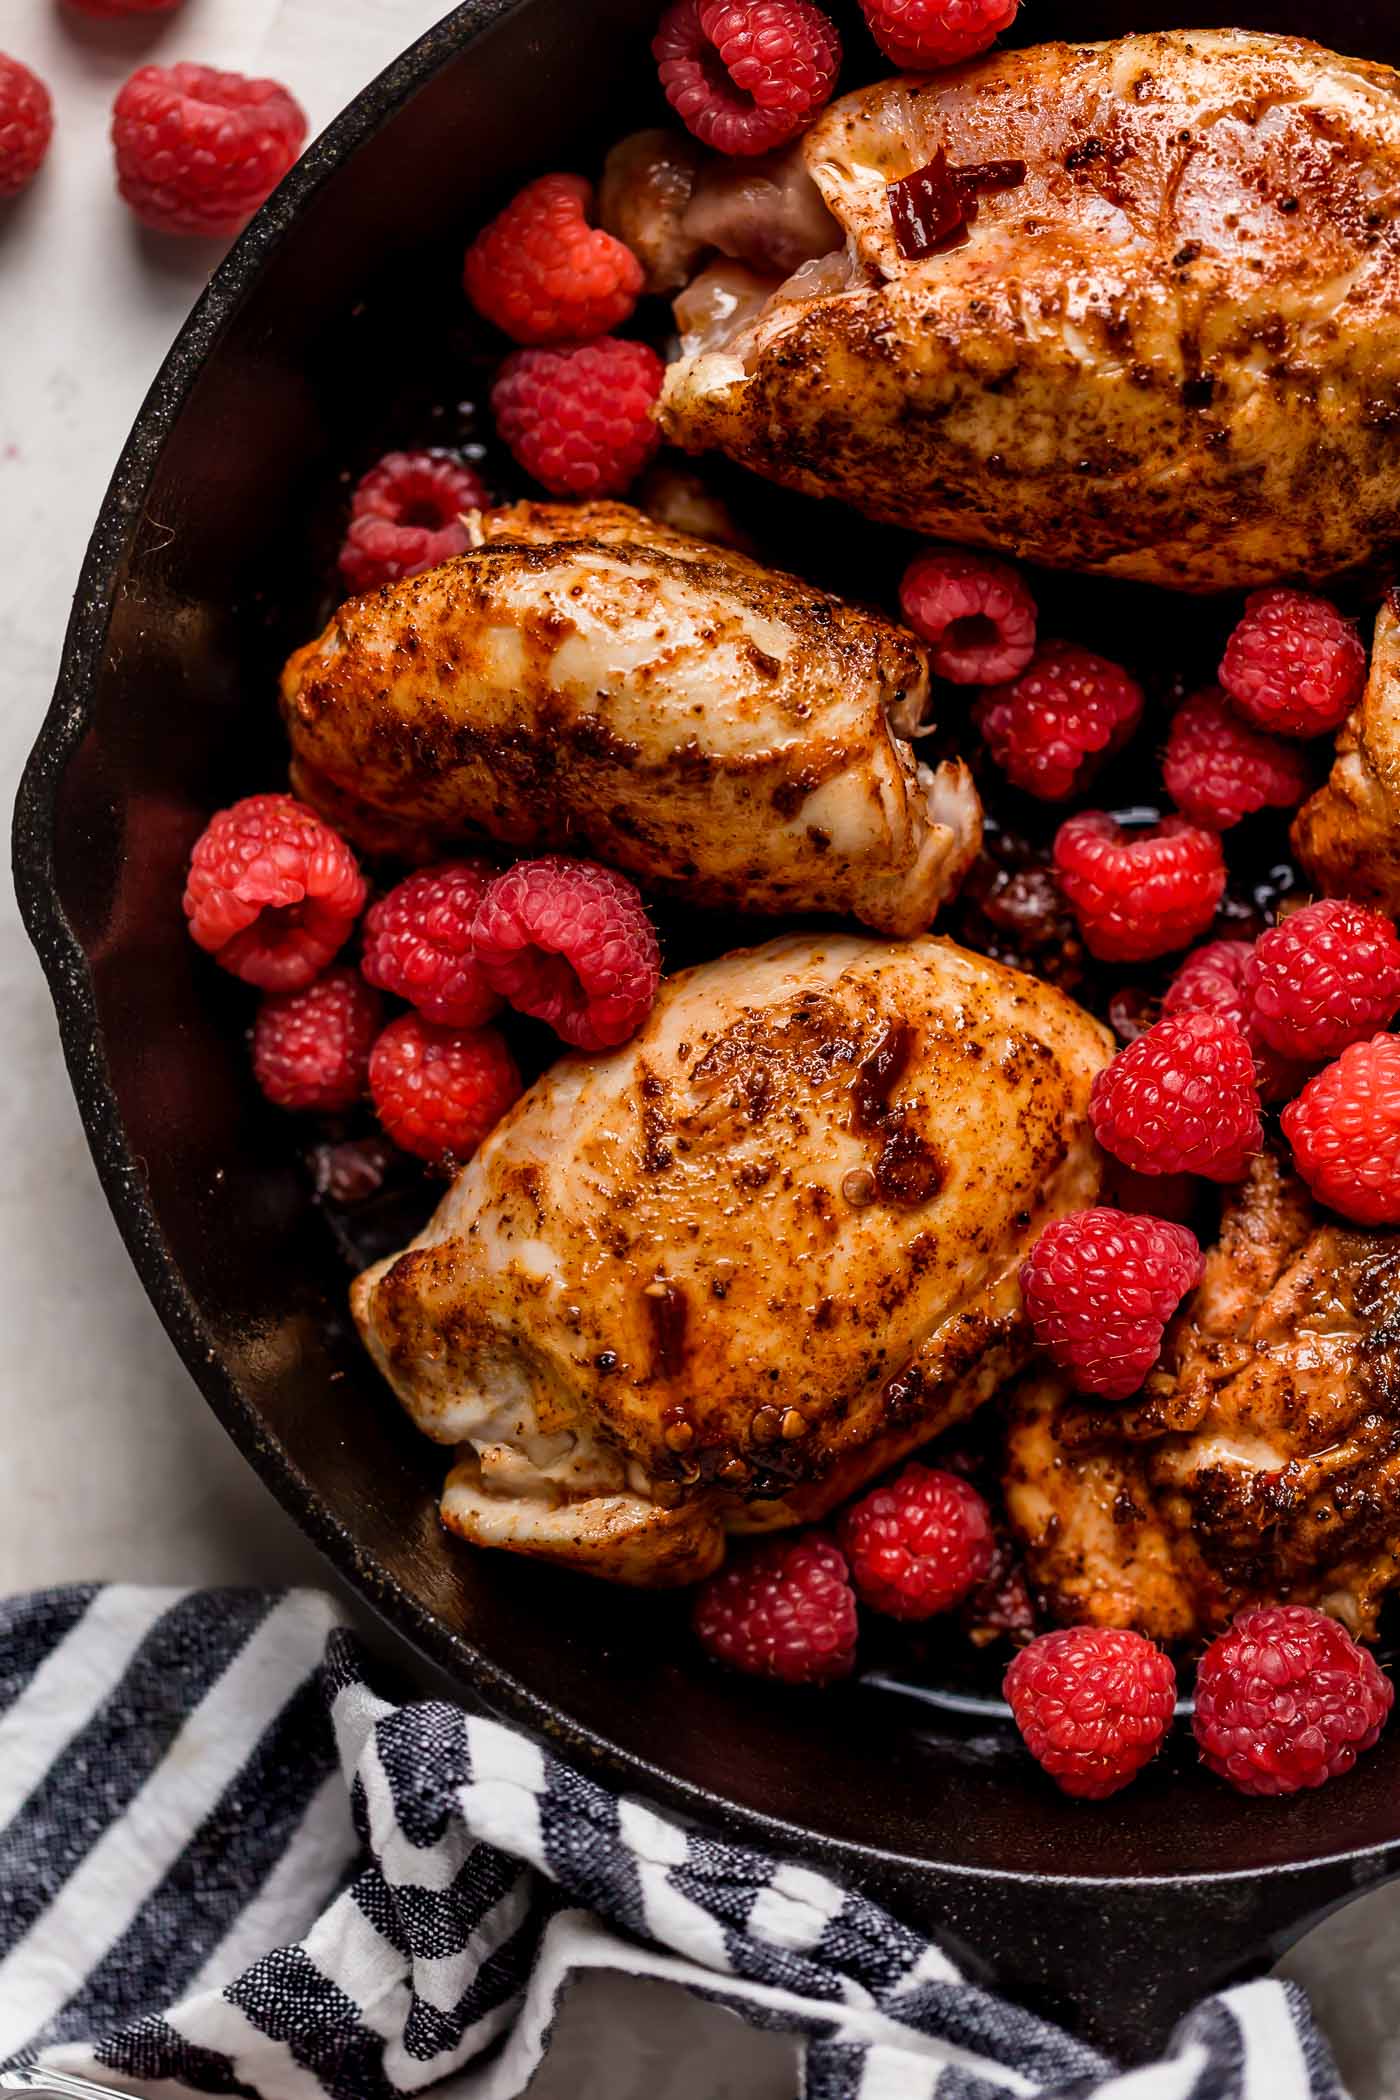 an easy one-skillet recipe for chipotle raspberry chicken, served overtop an autumn hummus bowl with creamy, garlicky hummus, finely shredded kale, wild rice, goat cheese, & some extra raspberries. chipotle raspberry chicken autumn hummus bowls are the perfect healthy & easy weeknight dinner, or an easy meal to prep for grab-&-go lunches this week! #hummusbowl #chipotleraspberrychicken #raspberryrecipes #raspberrydinnerrecipes #healthyrecipe #skilletrecipe #bowlrecipe #easyrecipe #mealprep